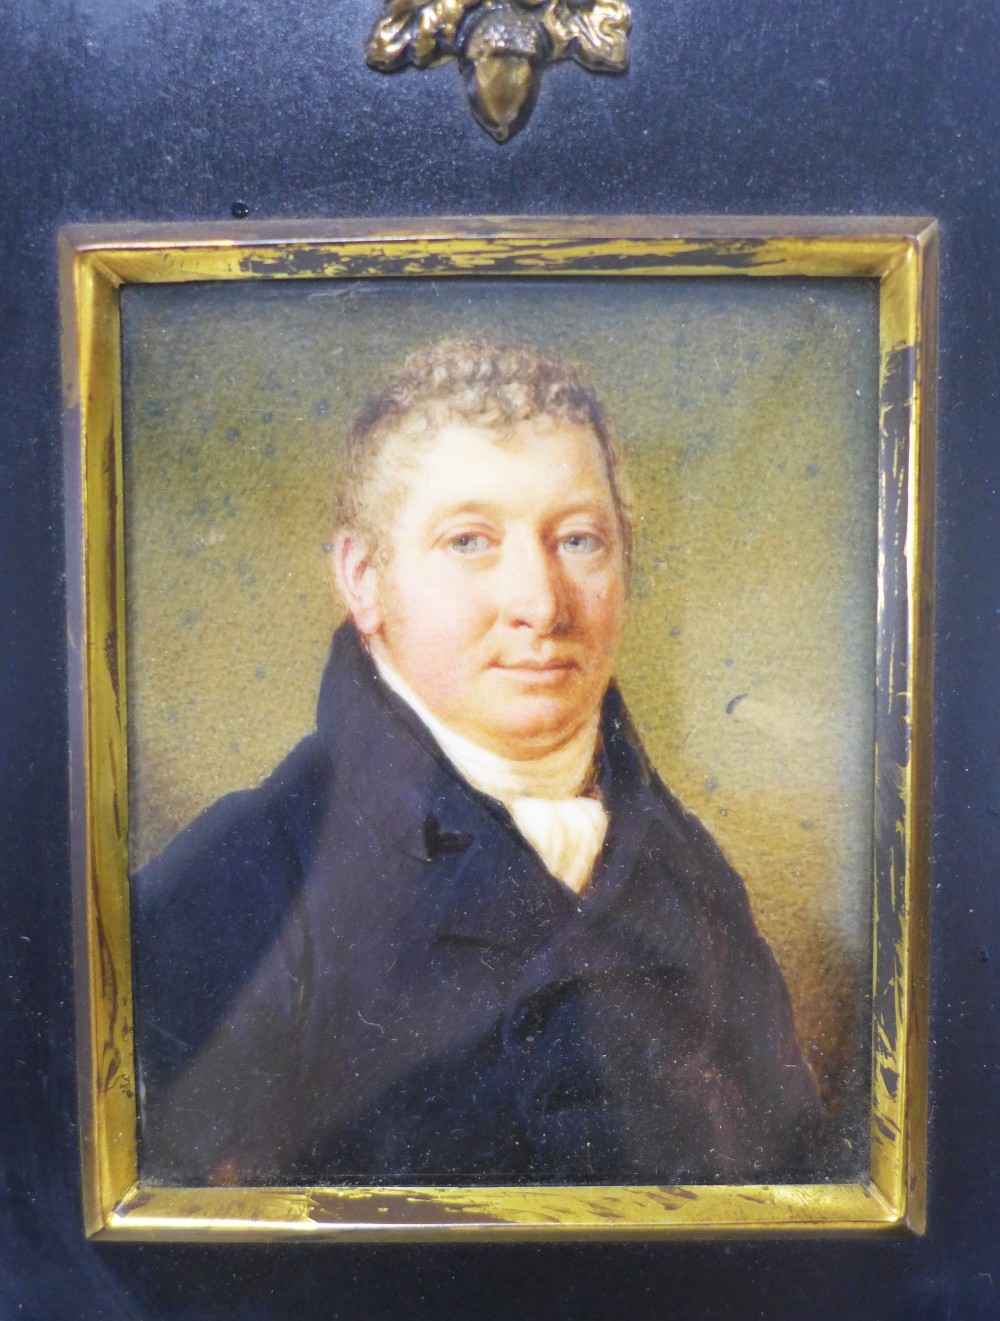 Four 19th century portrait miniatures, painted on ivory, to include Alexander Cunningham by - Image 5 of 5